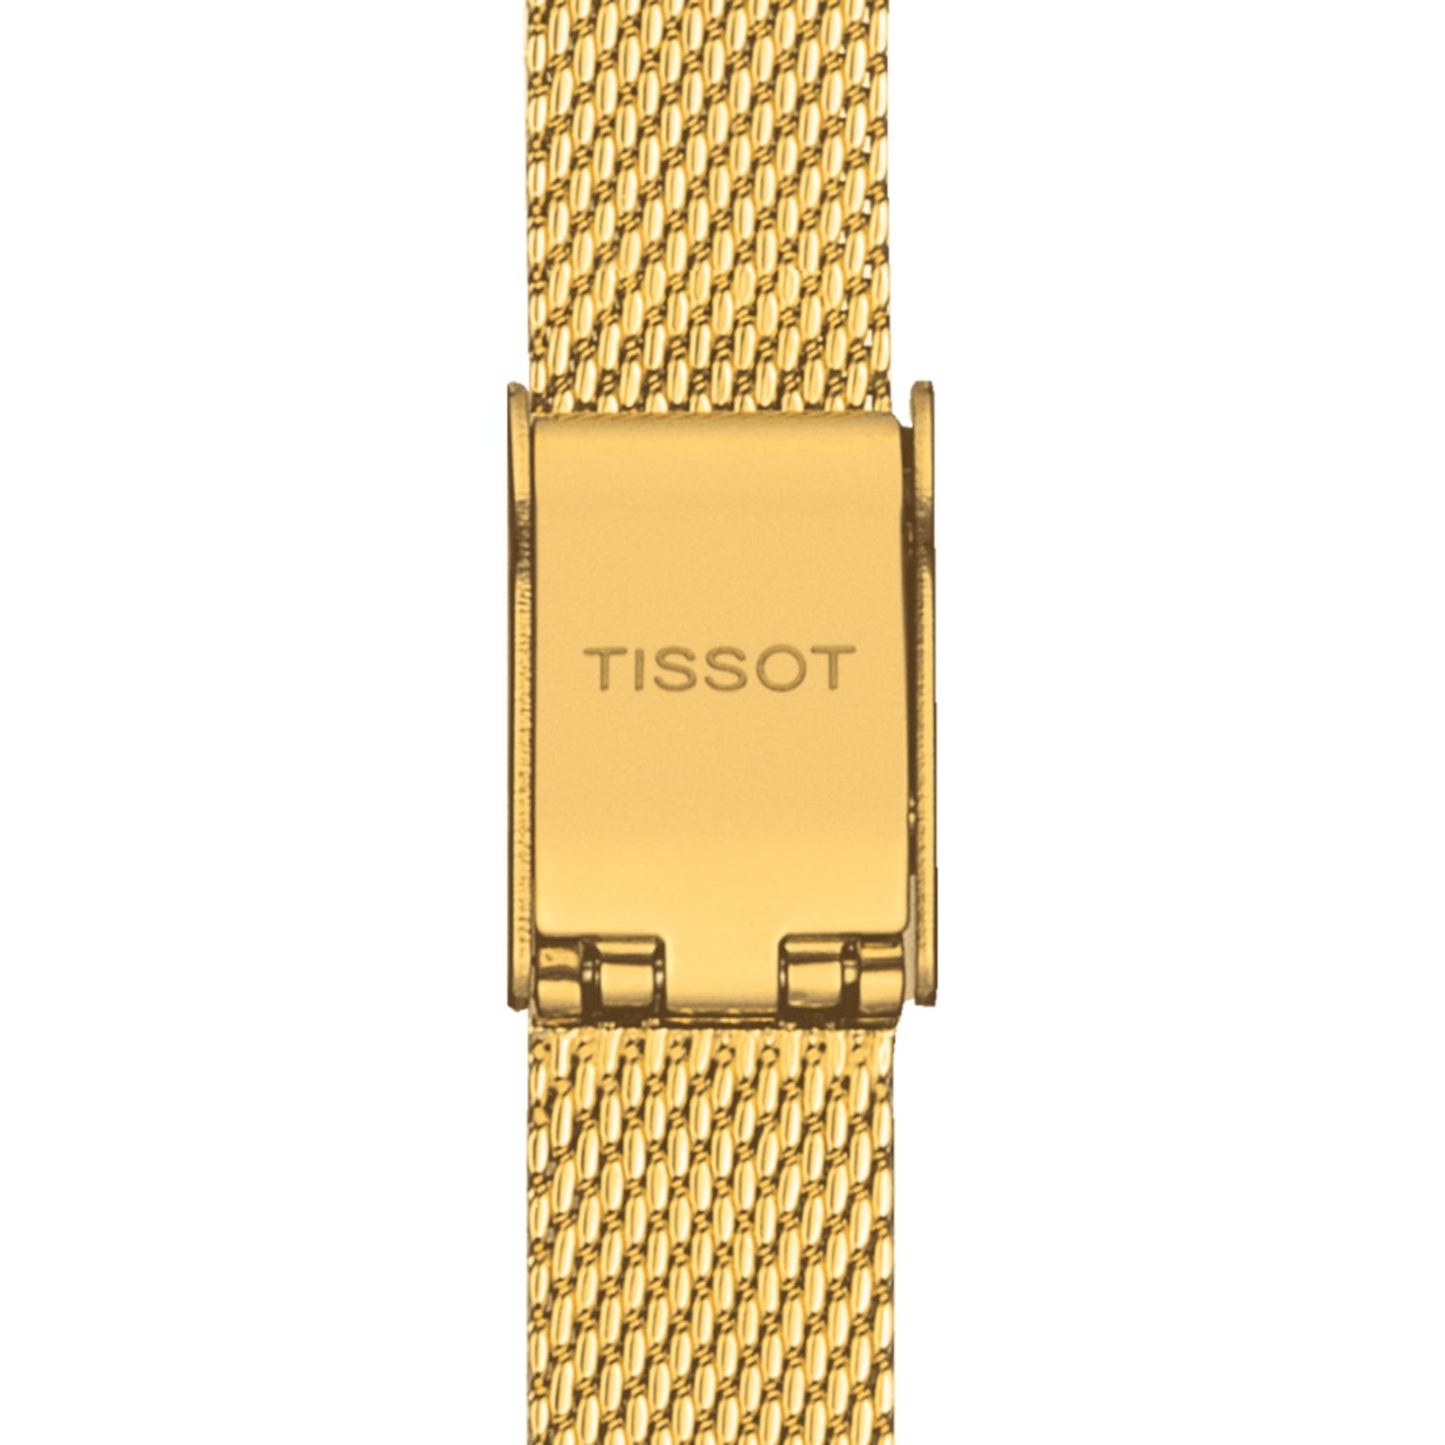 Tissot Lovely Square 316L stainless steel case with yellow gold PVD coating